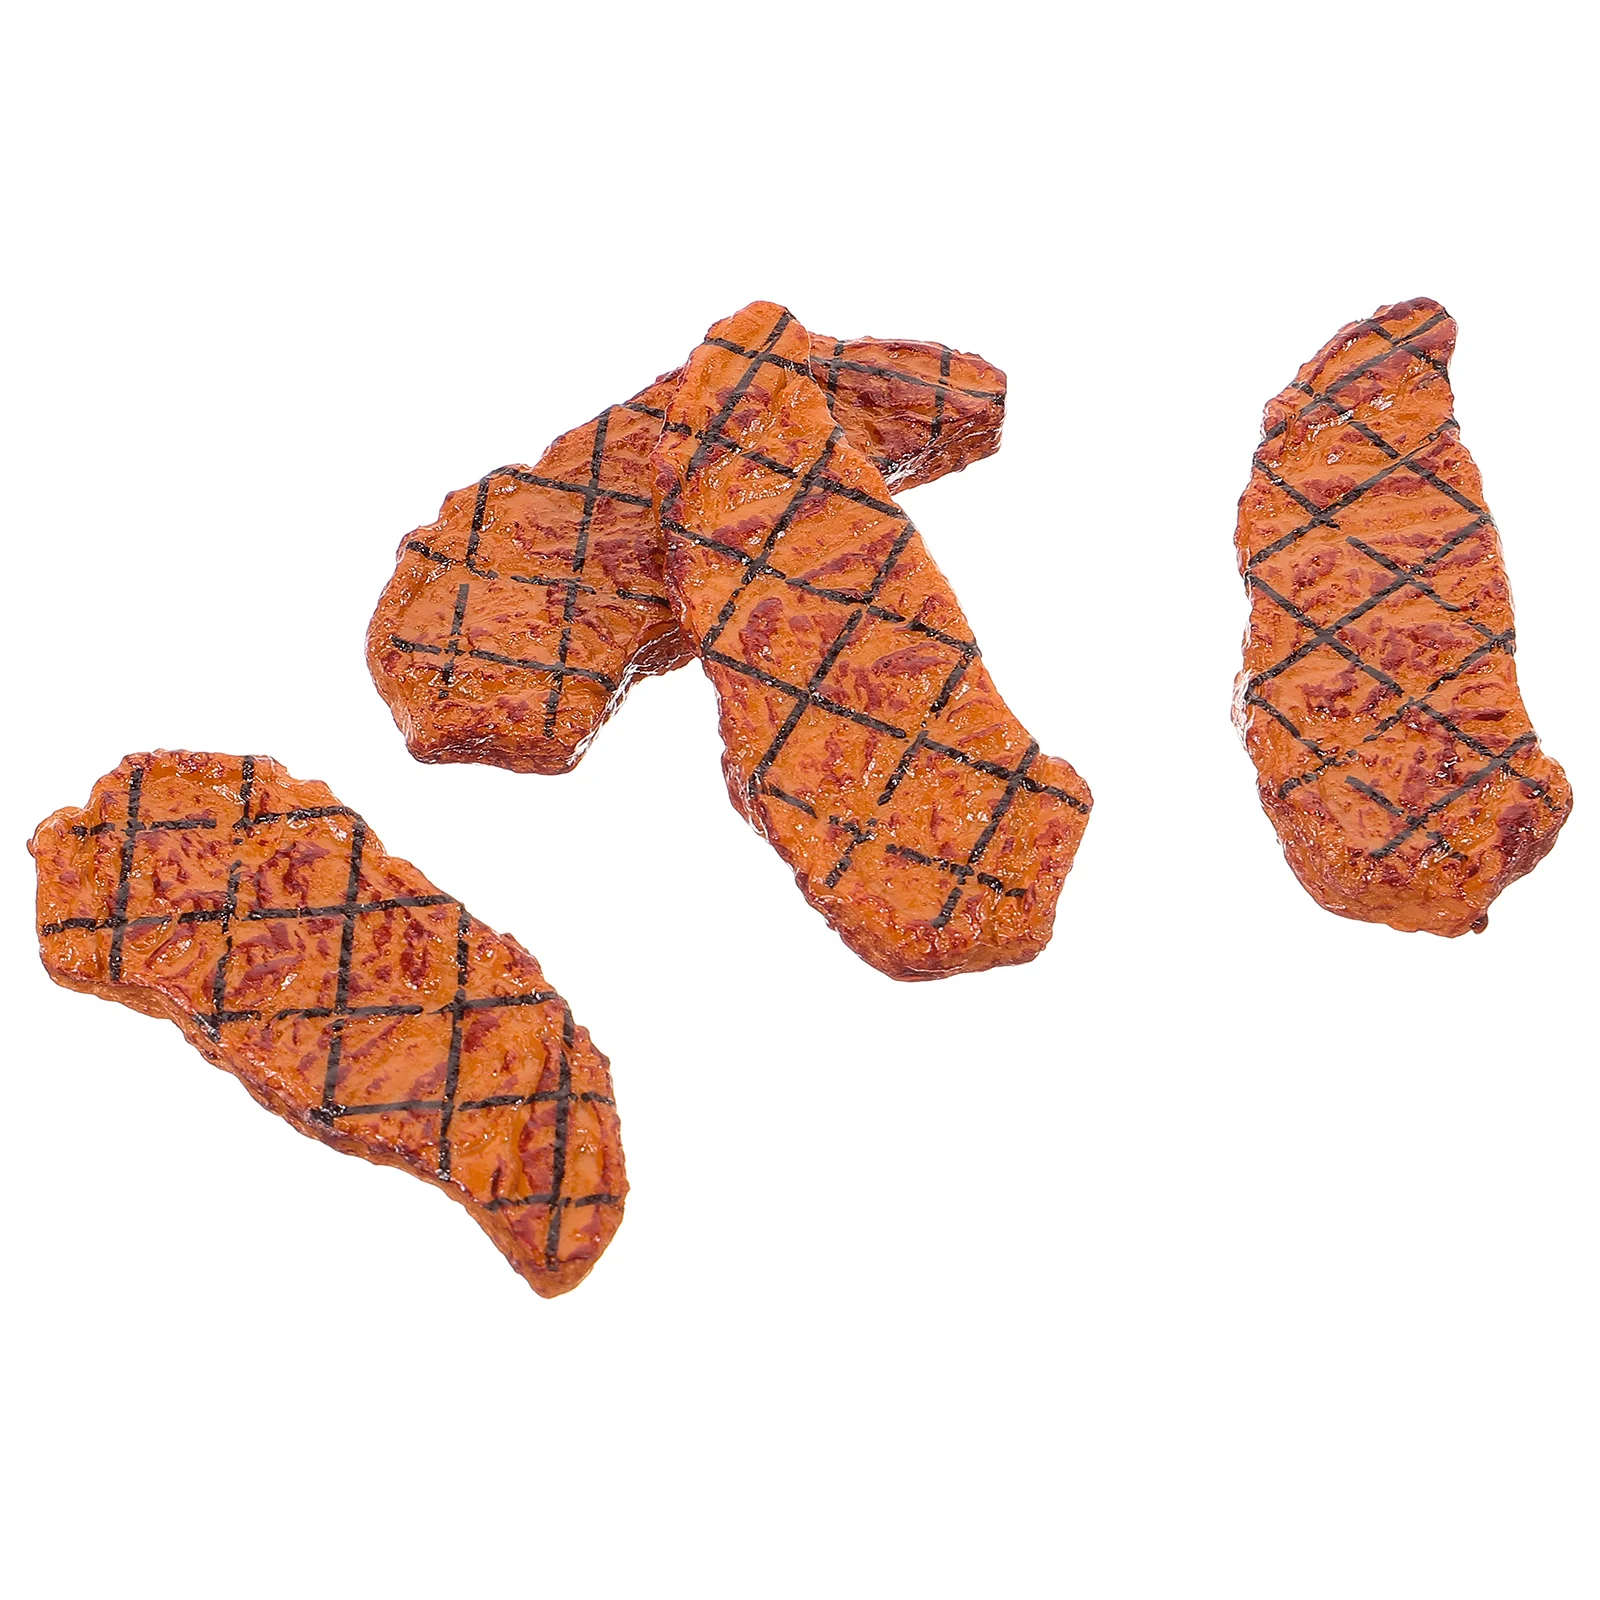 

4 Pcs Mini Steak Miniture Decoration Fake Steaks Simulated Simulation Artificial Meat Realistic Food Pvc Props Photo Cooked